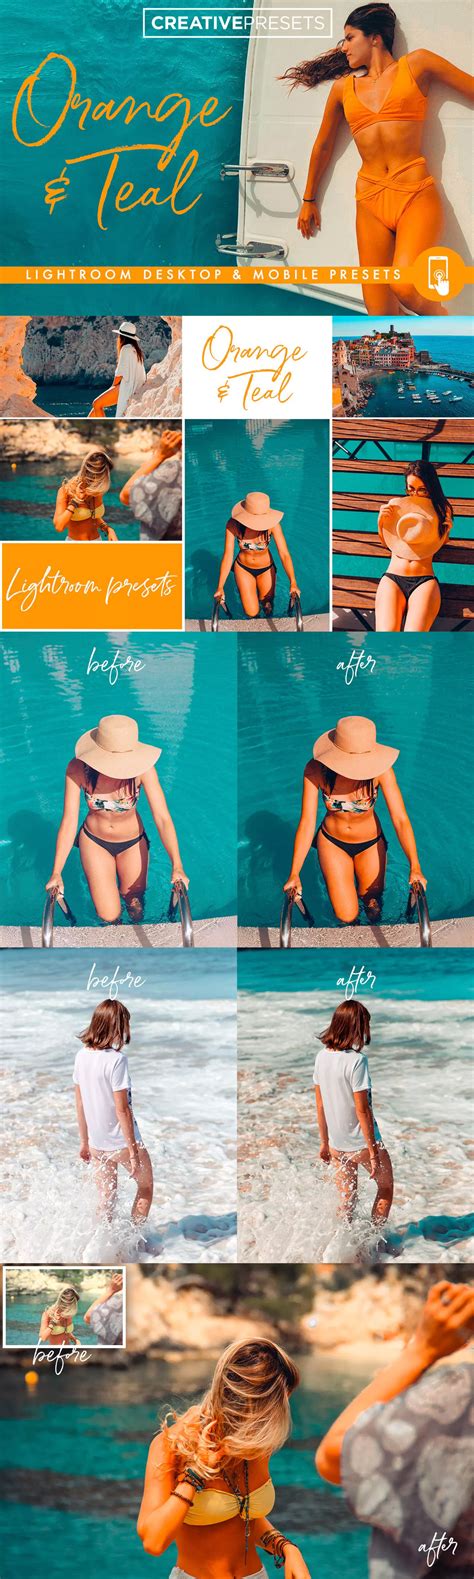 The button to download orange & teal preset is at the end of the post. Orange and Teal Lightroom Presets Desktop & Mobile by 2FX ...